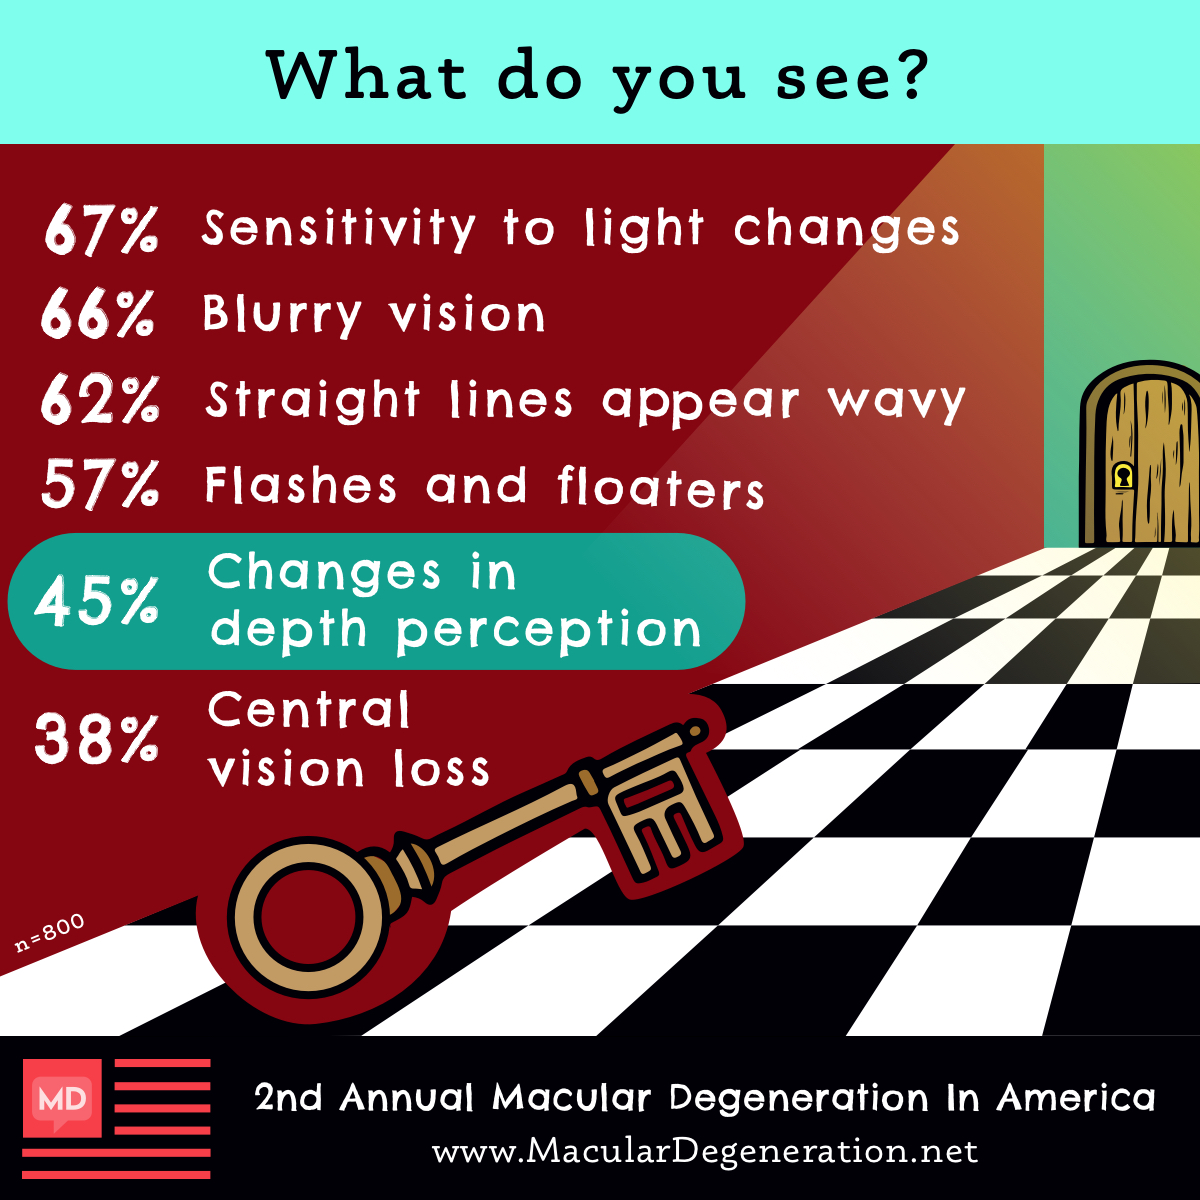 67% of respondents of the macular degeneration In America survey report having sensitivity to light, 66% have blurry vision, and 62% said straight lines appear wavy.